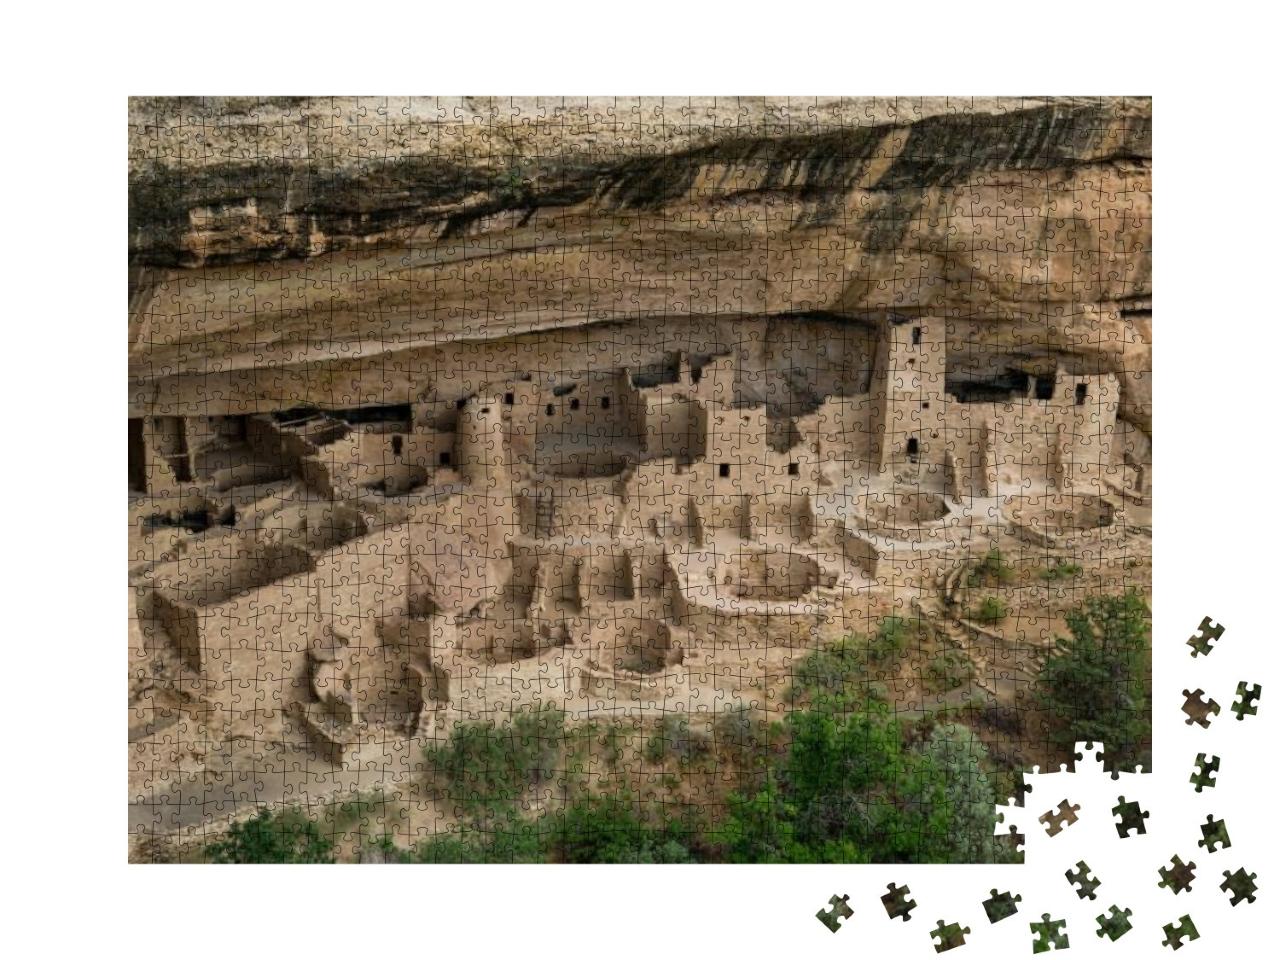 Cliff Palace At Mesa Verde National Park in Mesa Verde, C... Jigsaw Puzzle with 1000 pieces